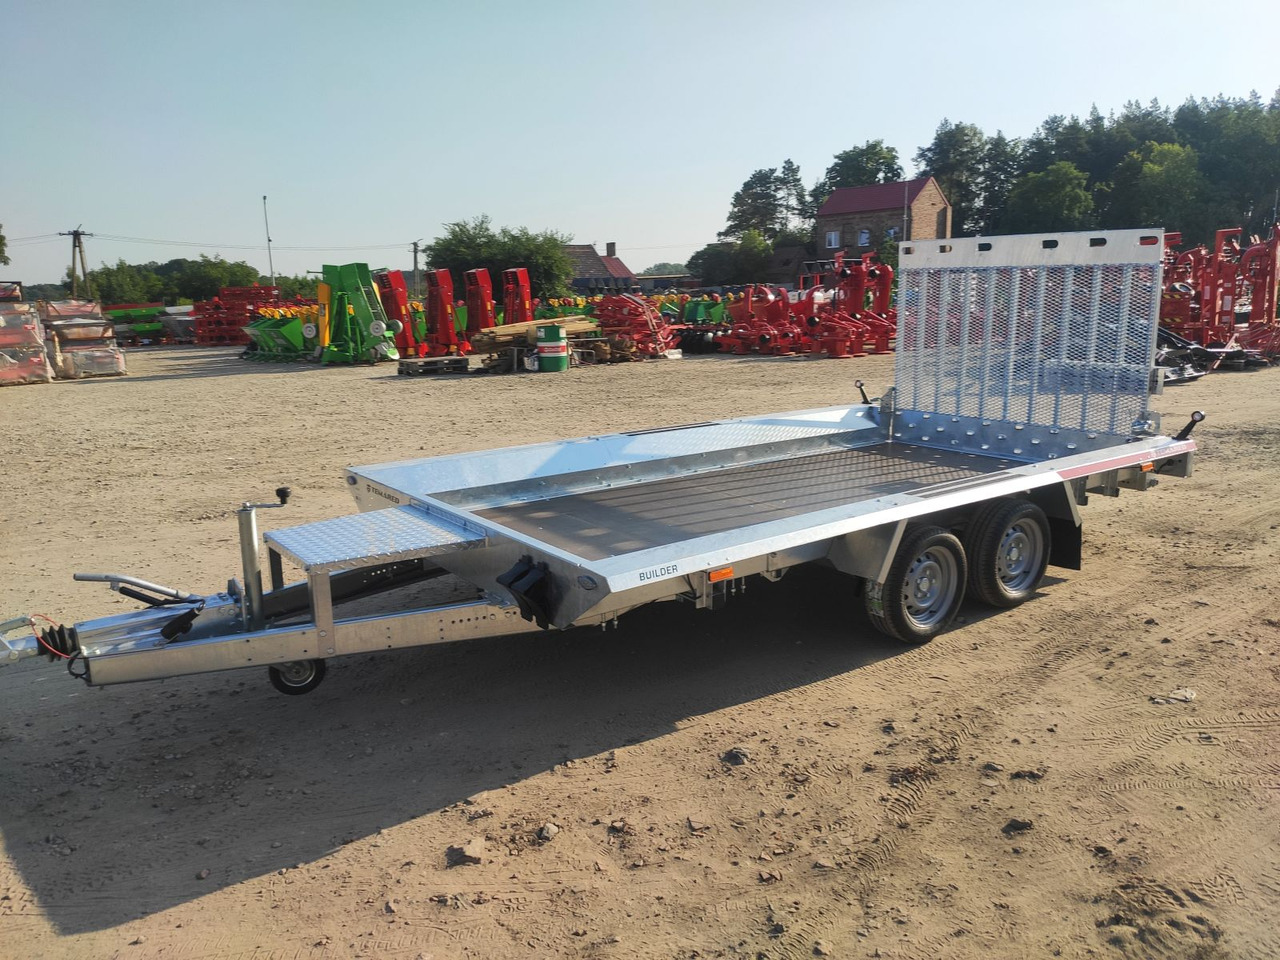 Leasing TEMARED BUILDER 3 4018/2 S 3,5T TEMARED BUILDER 3 4018/2 S 3,5T: kuva Leasing TEMARED BUILDER 3 4018/2 S 3,5T TEMARED BUILDER 3 4018/2 S 3,5T